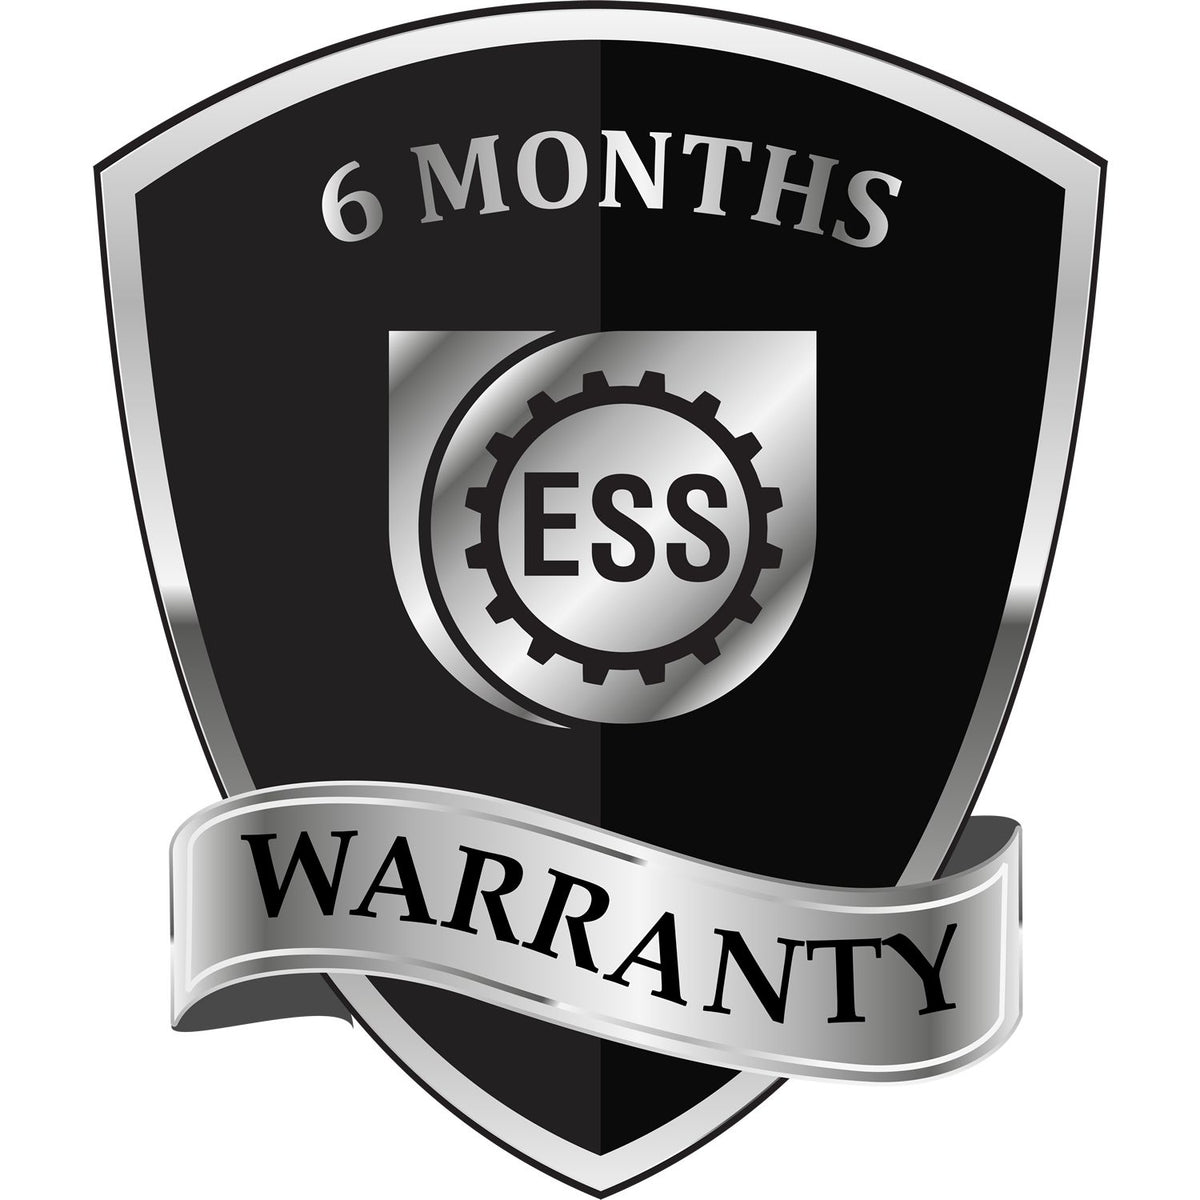 A badge or emblem showing a warranty icon for the Slim Pre-Inked Florida Professional Engineer Seal Stamp